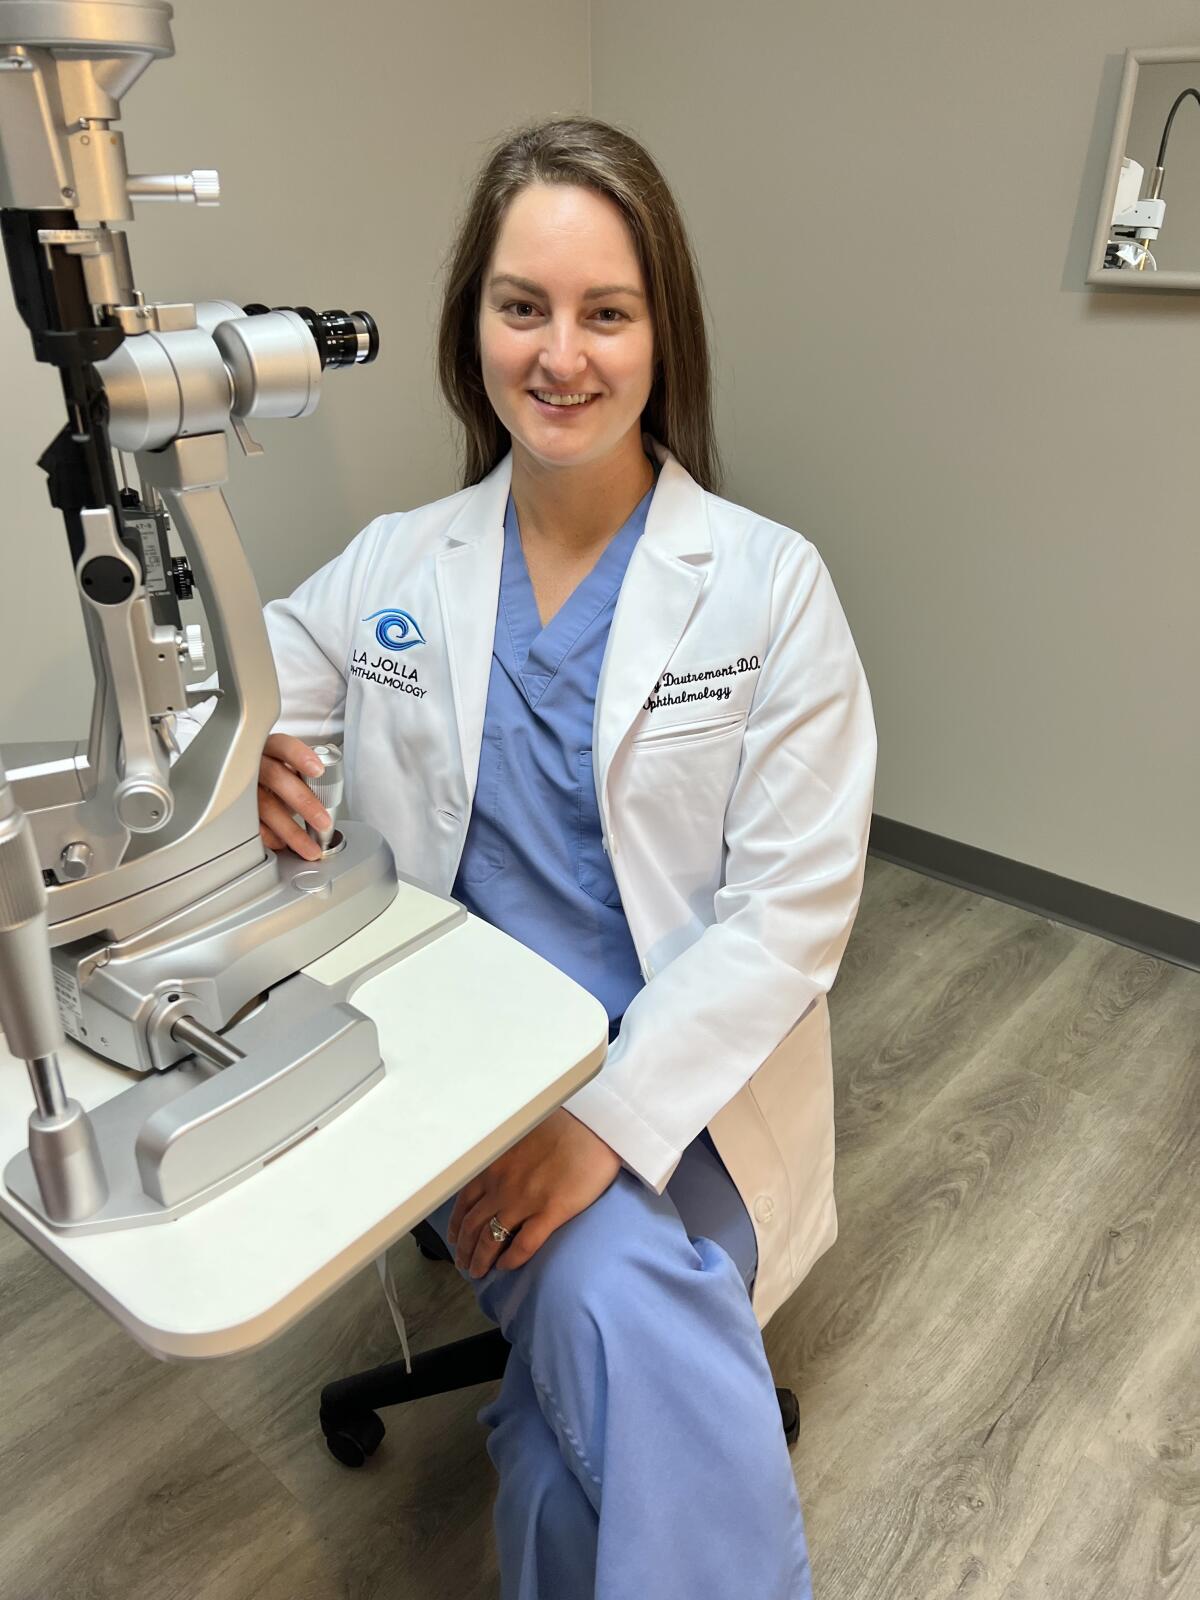 Dr. Brittney Dautremont opened La Jolla Ophthalmology in October.